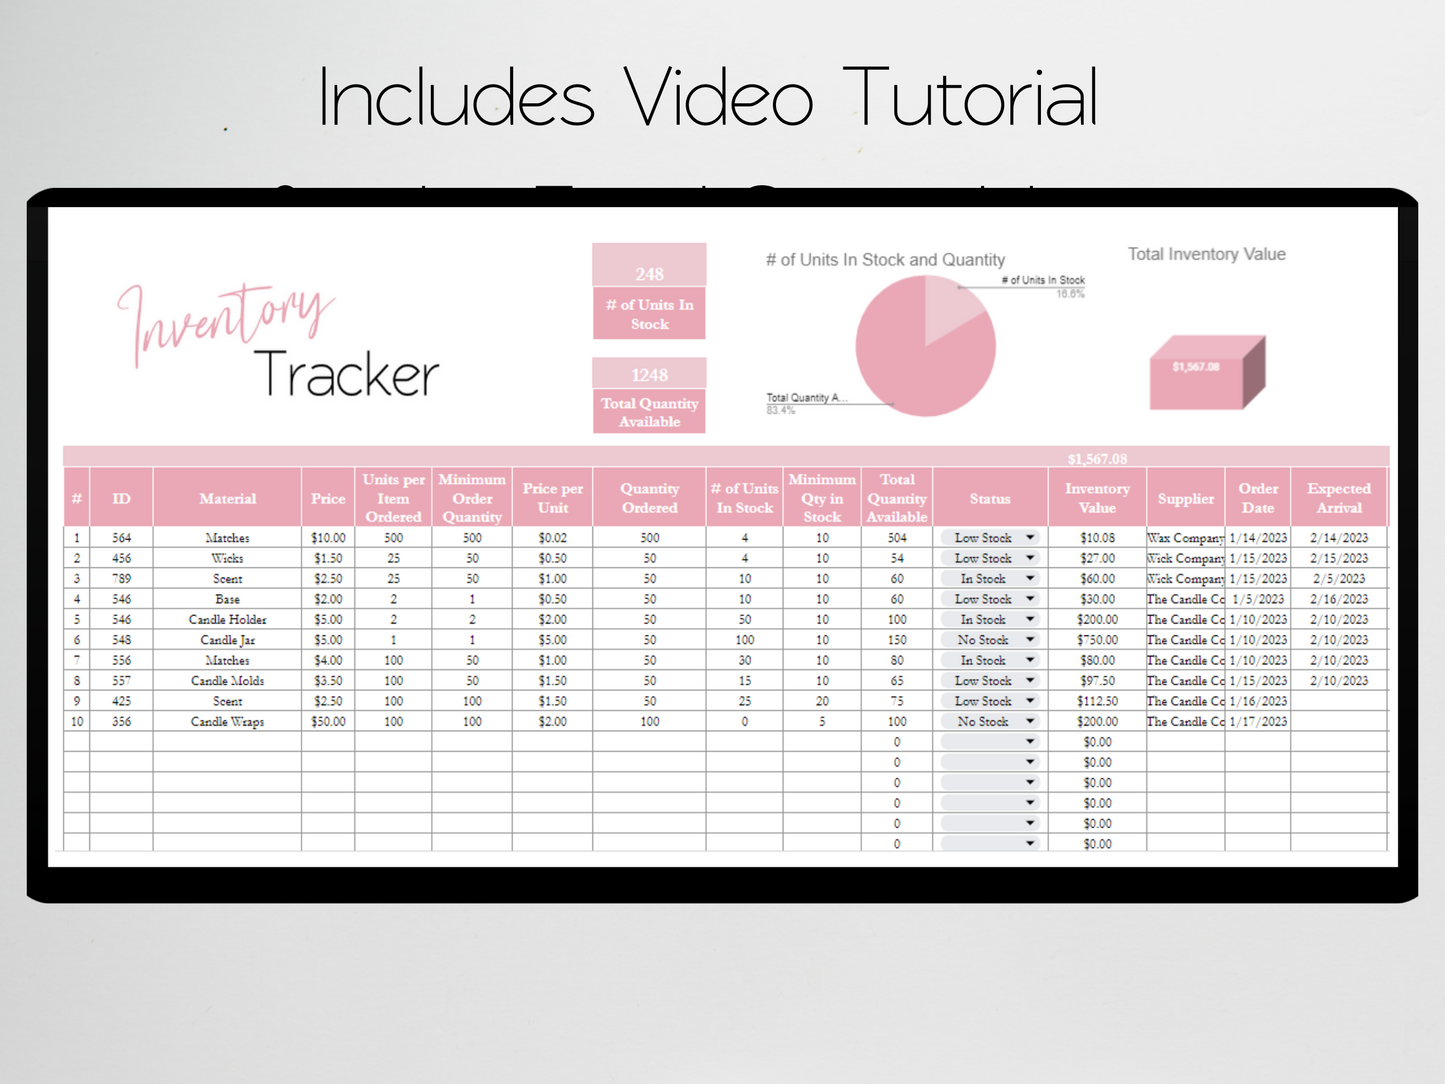 Inventory Tracker Template Google Sheets Excel Spreadsheet